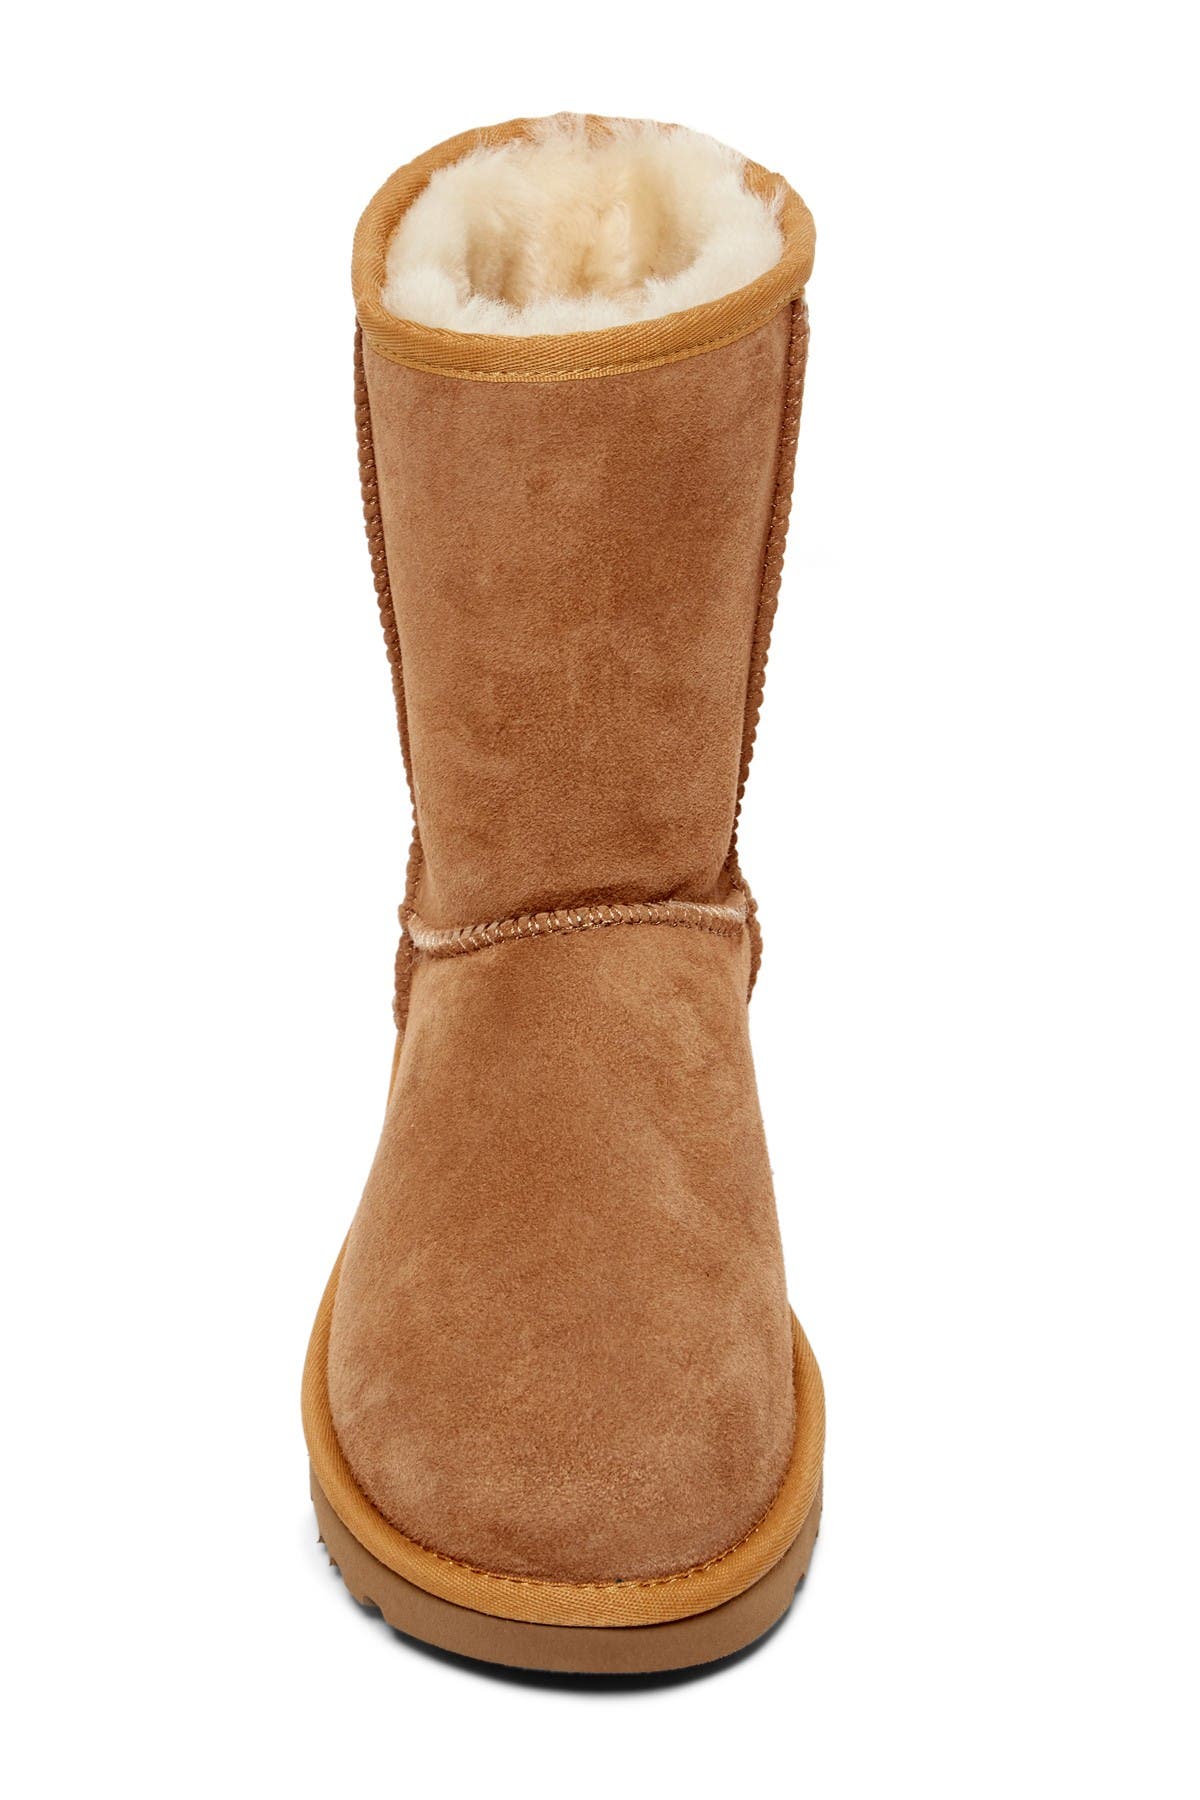 ugg classic genuine shearling lined short rustic weave boot